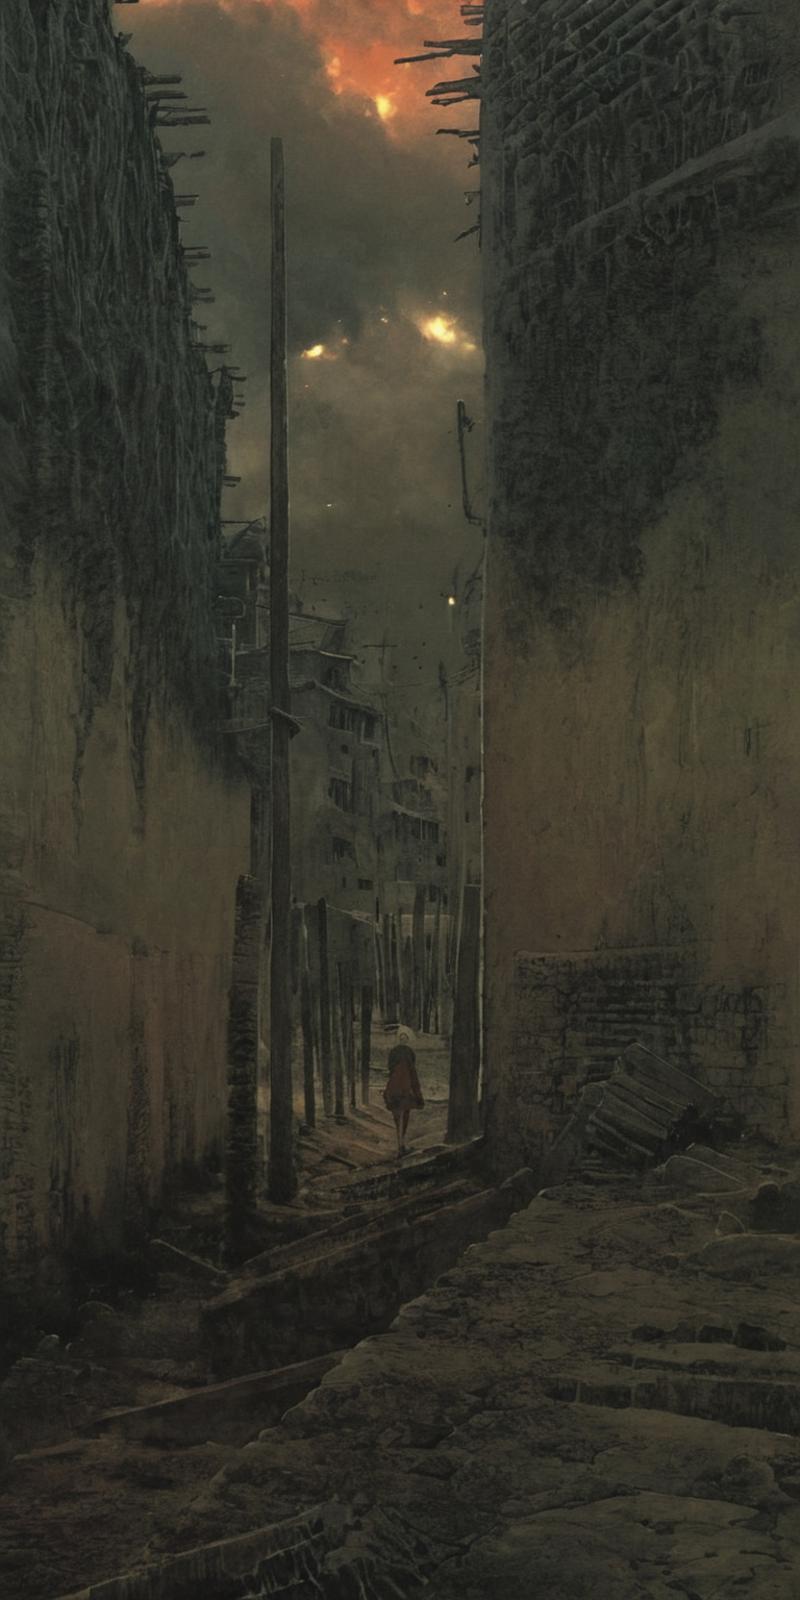 A person walking down a dark alley in the city between two buildings.